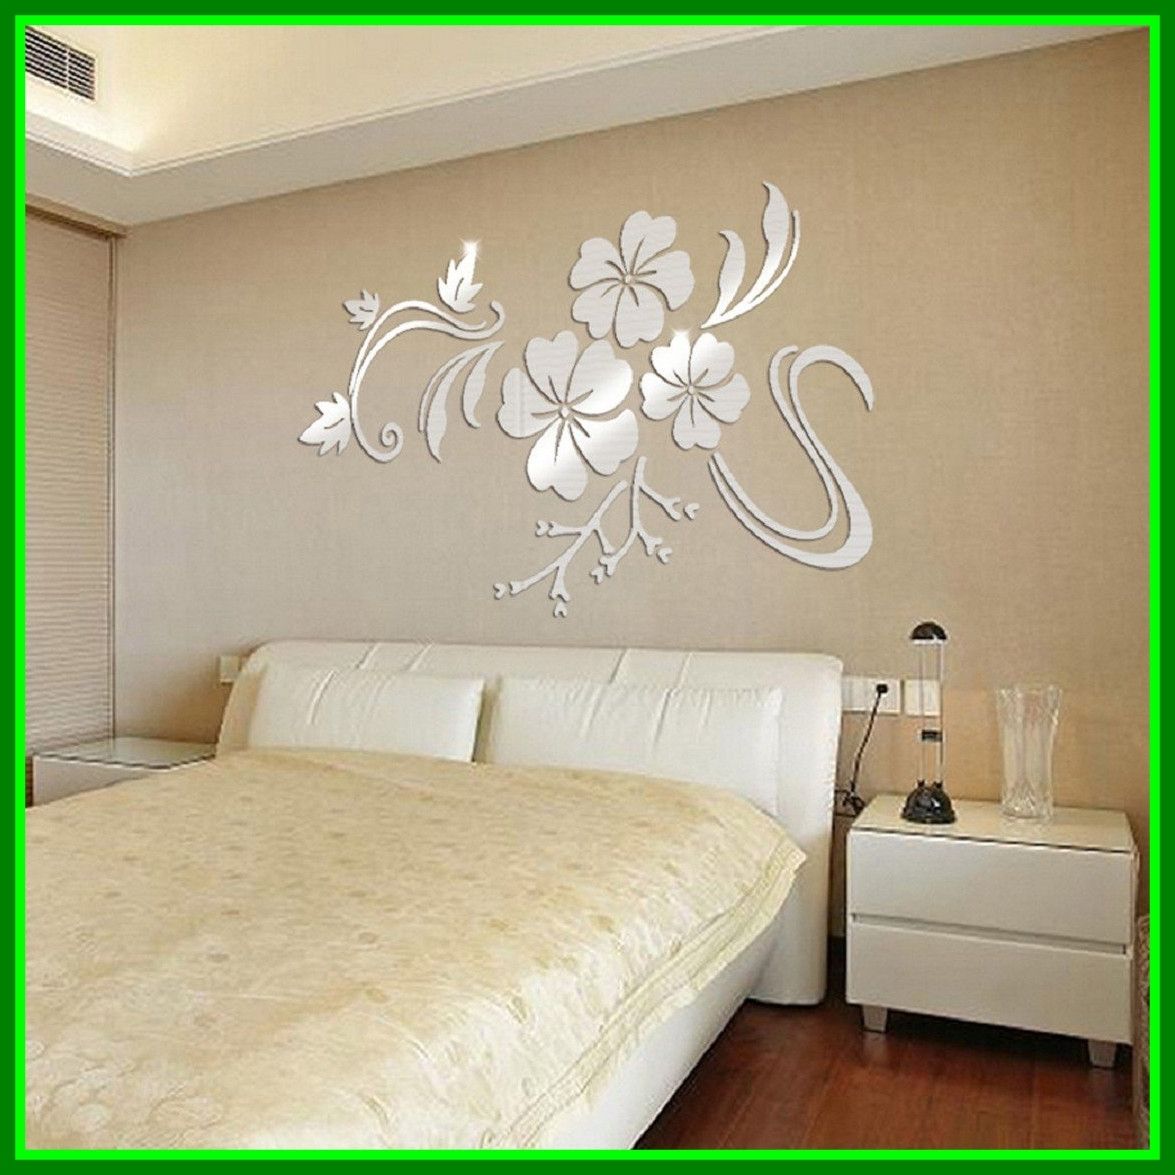 Incredible Design Home Wall Art Fresh Decoration Ikevan Set Acrylic With Acrylic Wall Art (View 19 of 20)